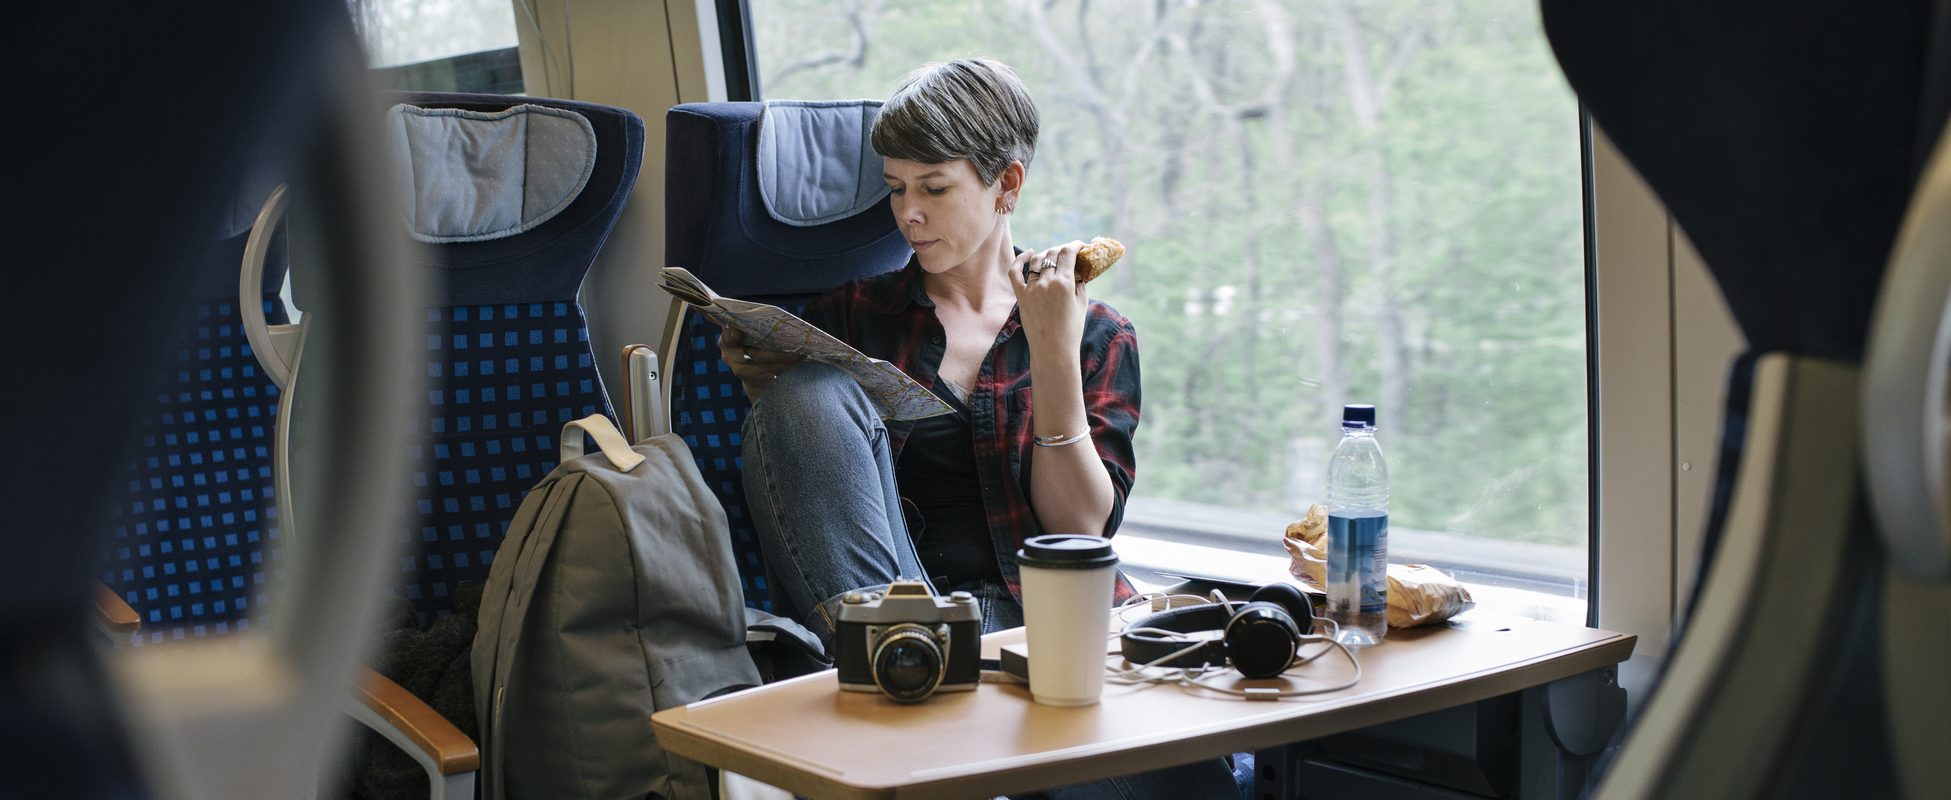 Woman travelling by train enjoys her trip while saving money